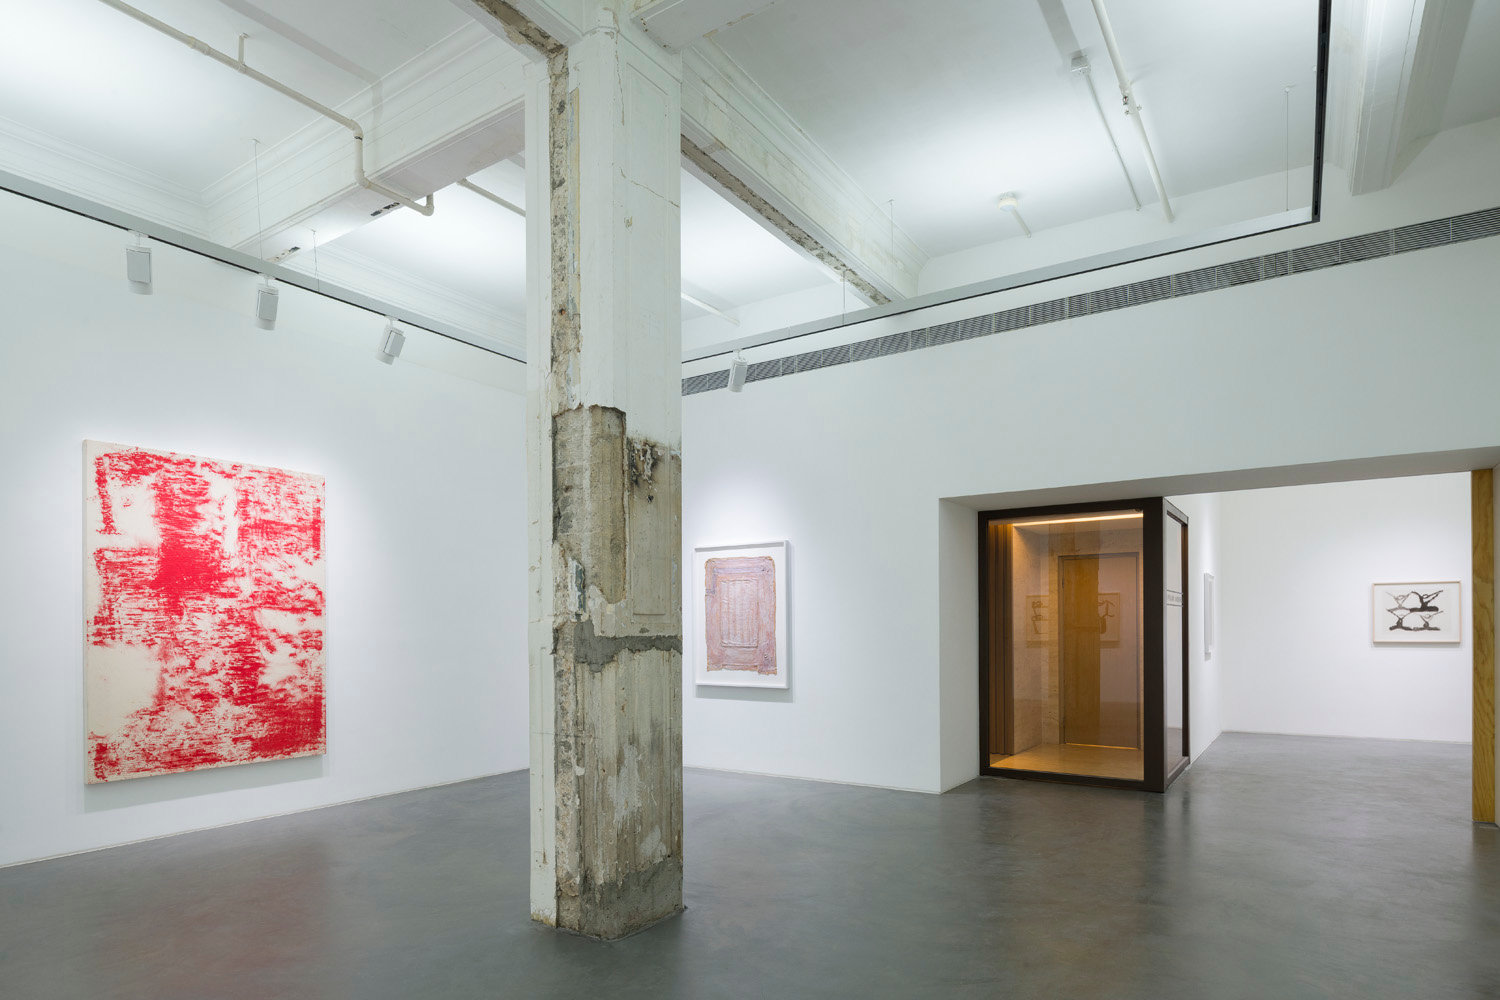 Fourth installation view of the group exhibition be/longing at Lehmann Maupin Hong Kong